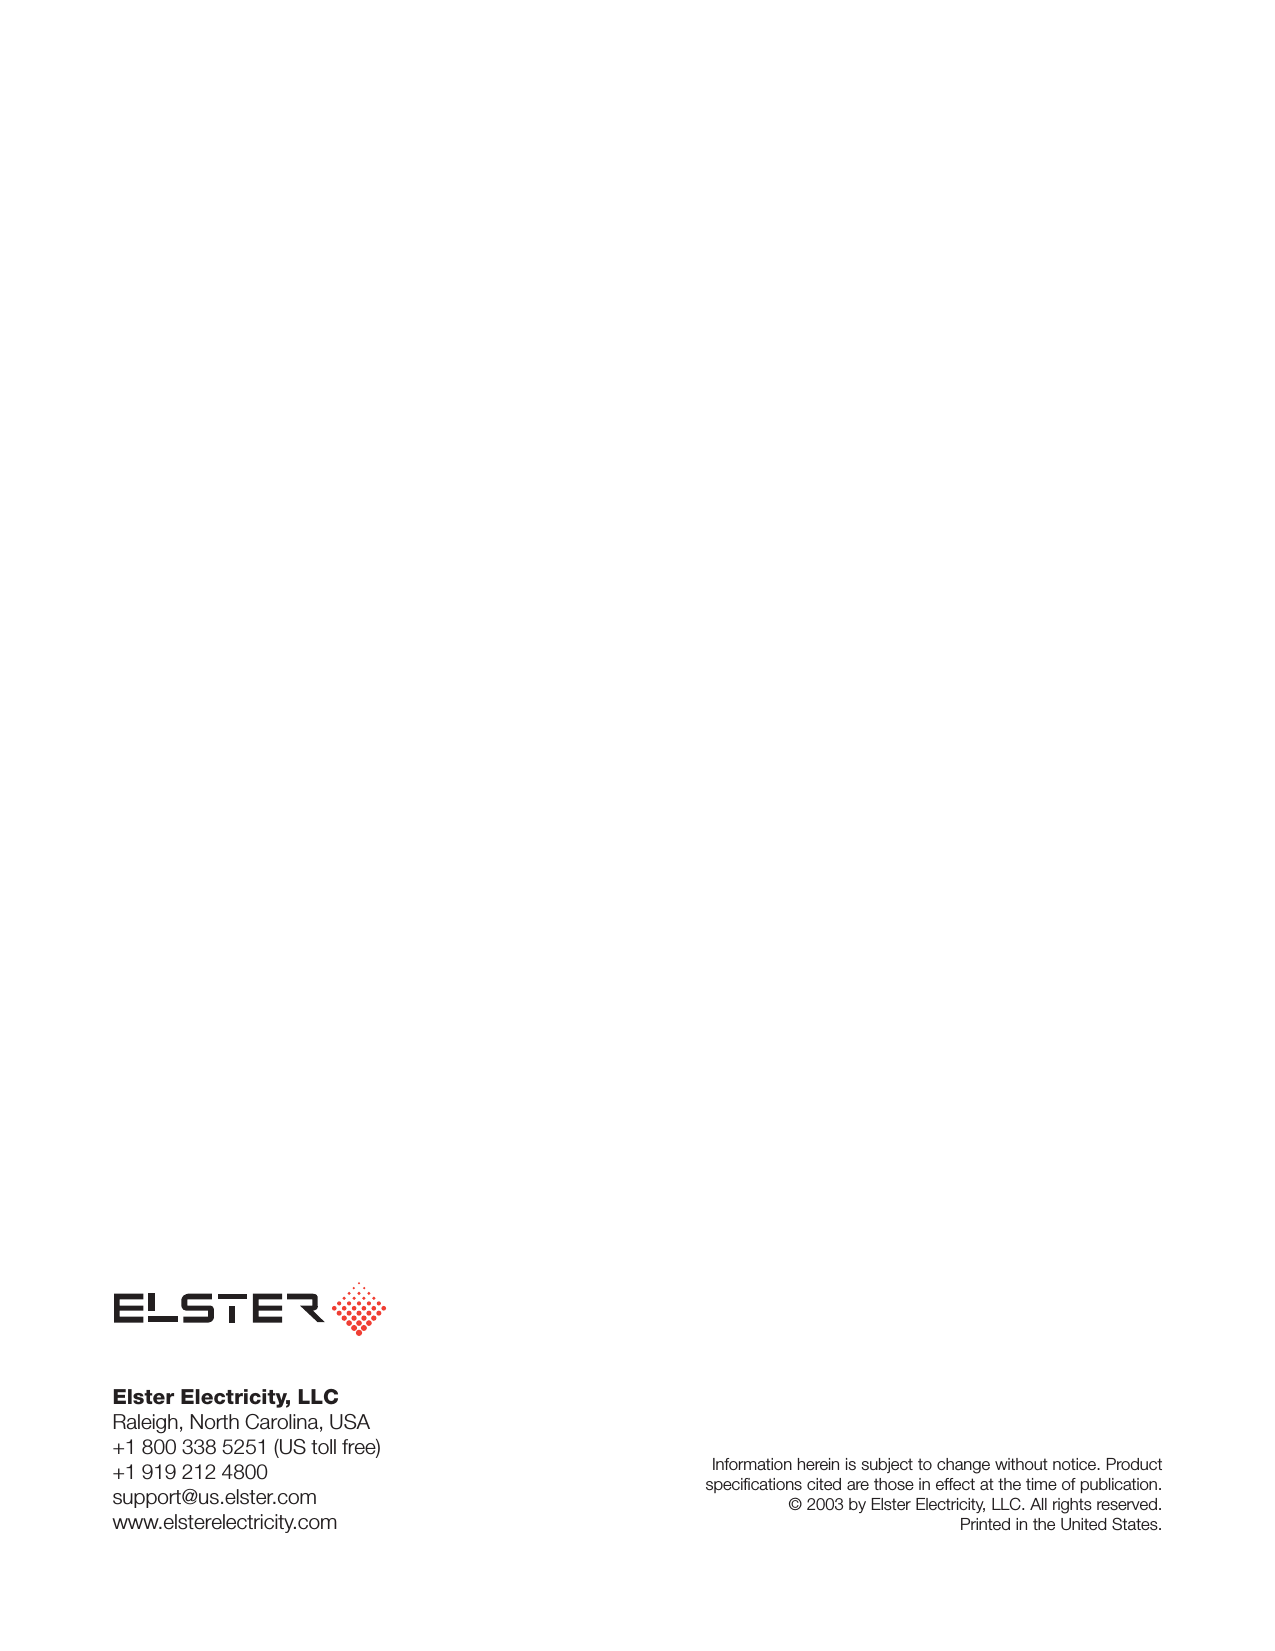 Elster Electricity, LLCRaleigh, North Carolina, USA+1 800 338 5251 (US toll free)+1 919 212 4800support@us.elster.comwww.elsterelectricity.comInformation herein is subject to change without notice. Productspecifications cited are those in effect at the time of publication.© 2003 by Elster Electricity, LLC. All rights reserved.Printed in the United States.